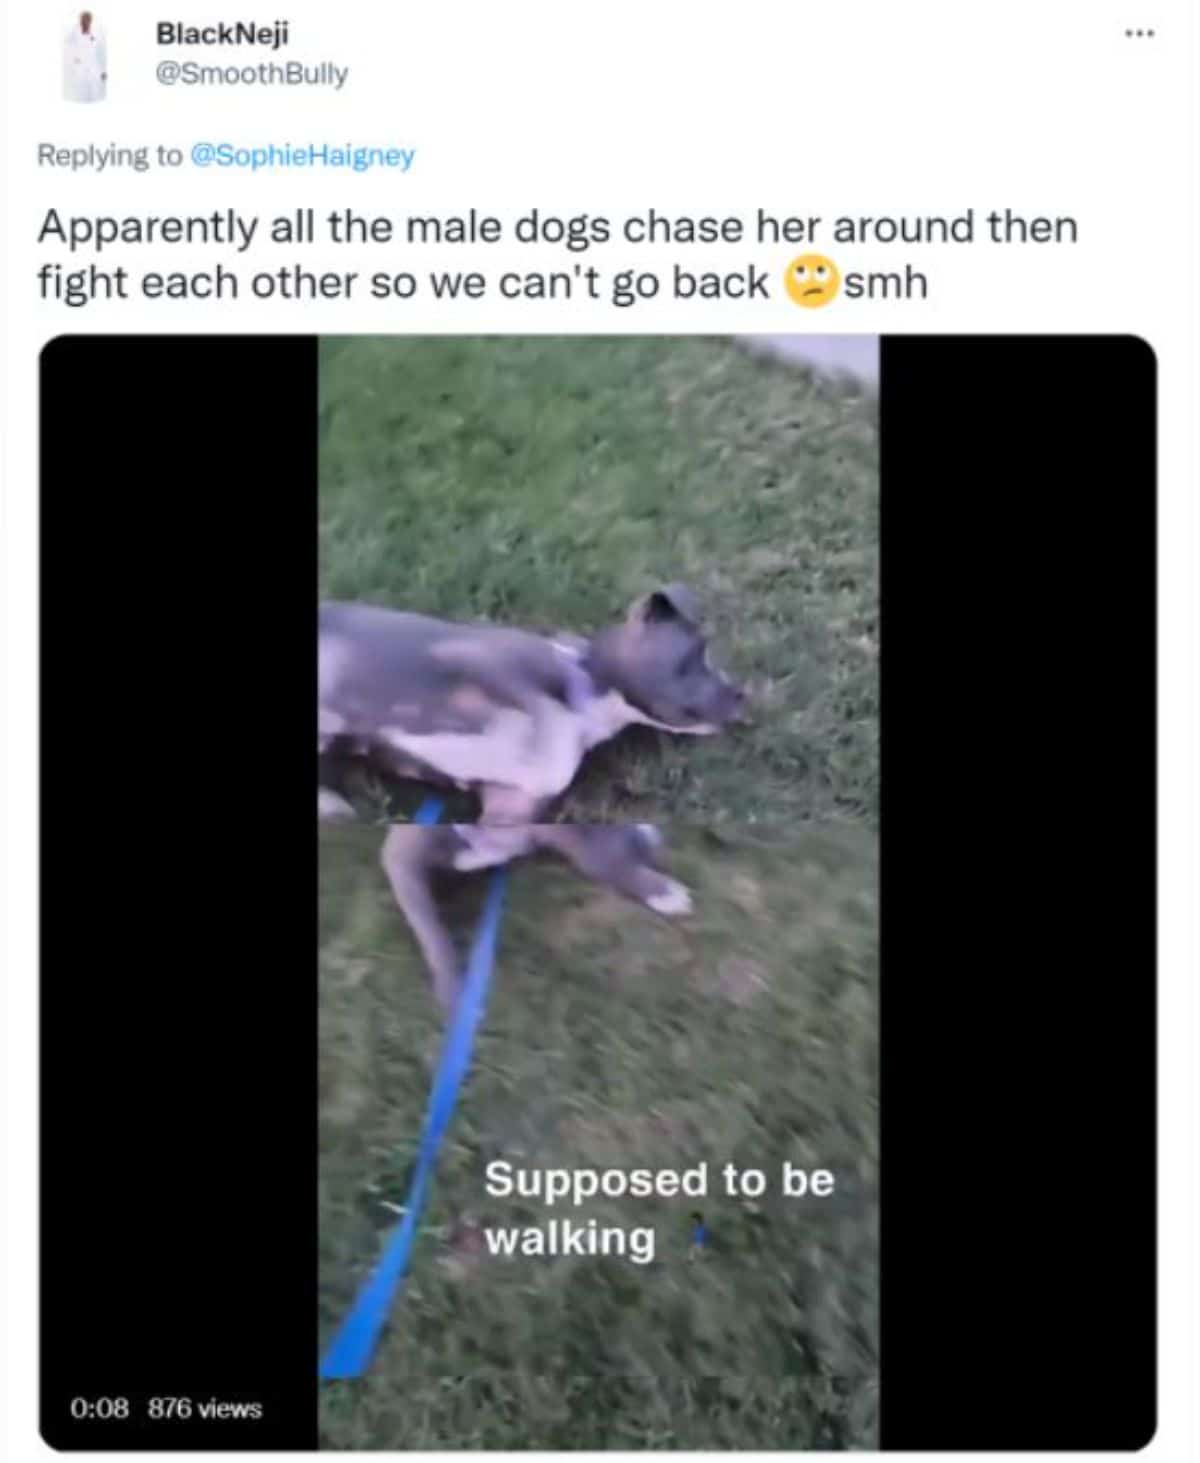 a tweet with a photo of a grey and white dog on her side on grass saying all the male dogs chased her around and fought each other so she can't return